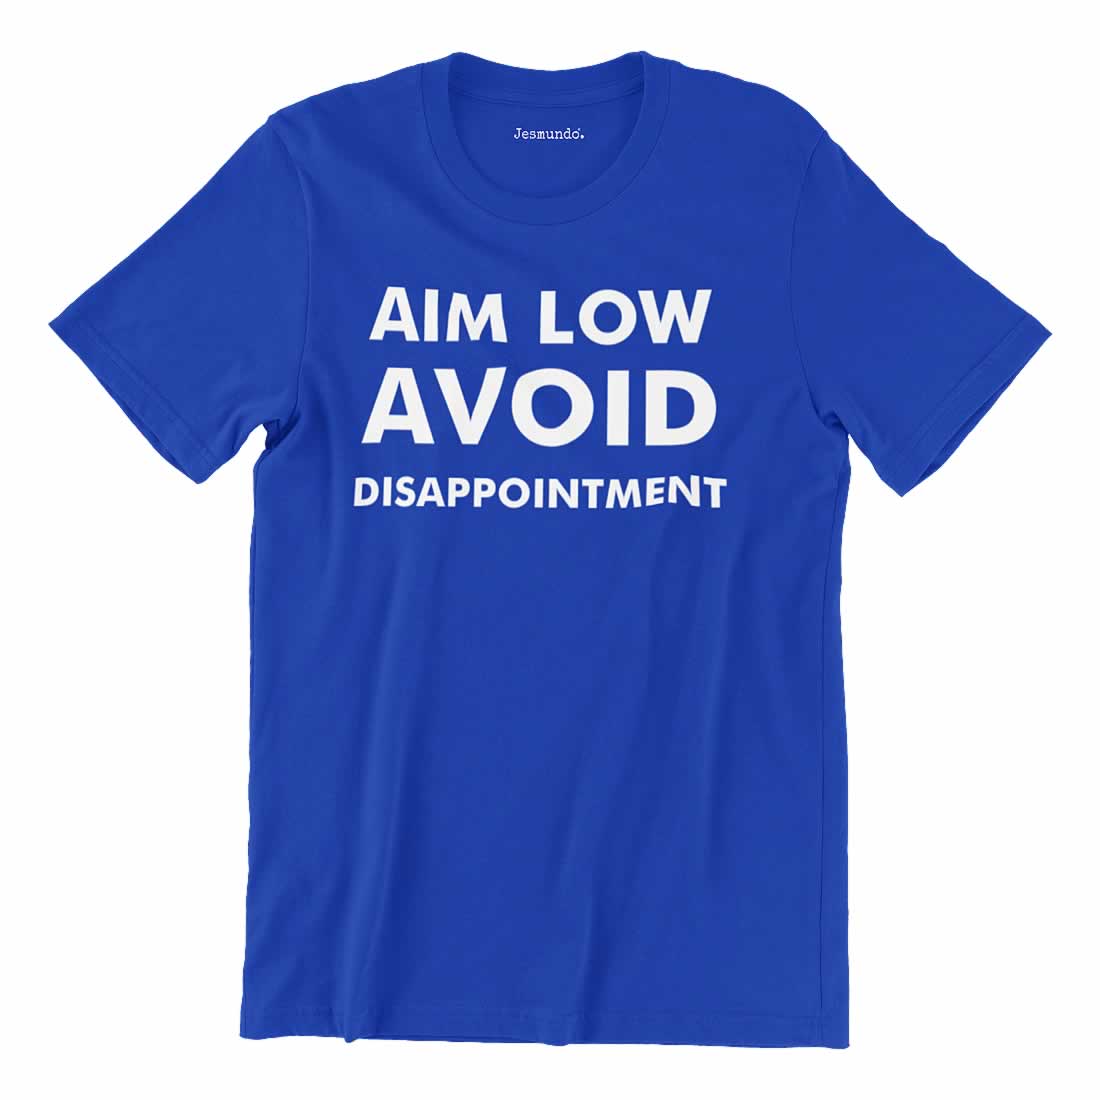 Aim low and avoid disappointment t shirt